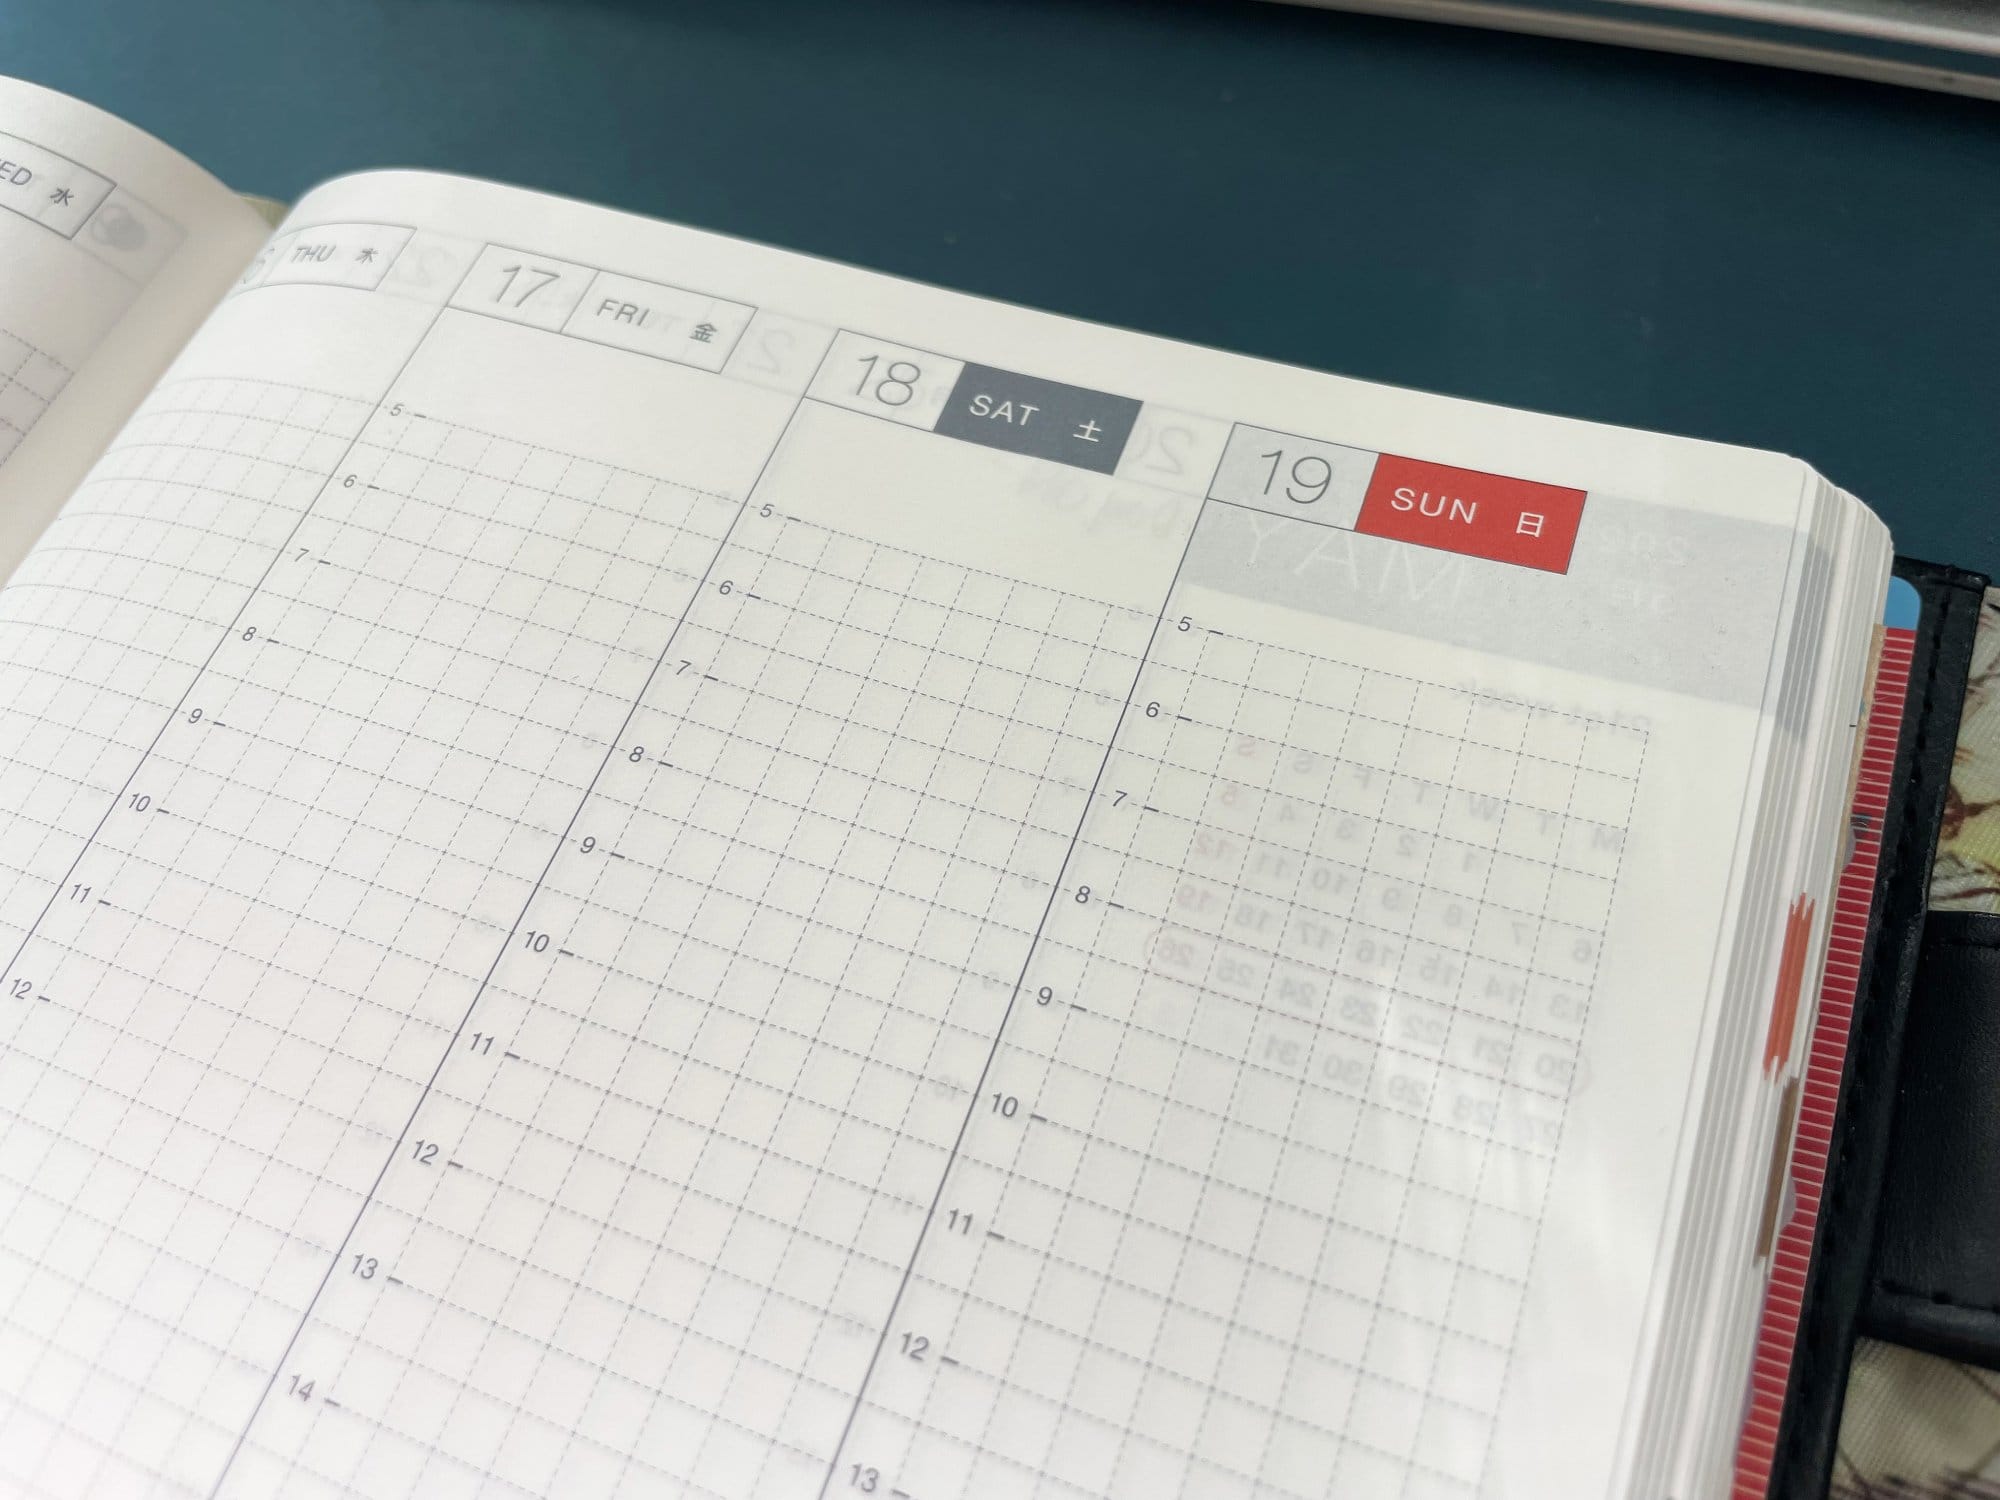 An open planner displaying an empty weekly schedule grid with Sunday highlighted in red